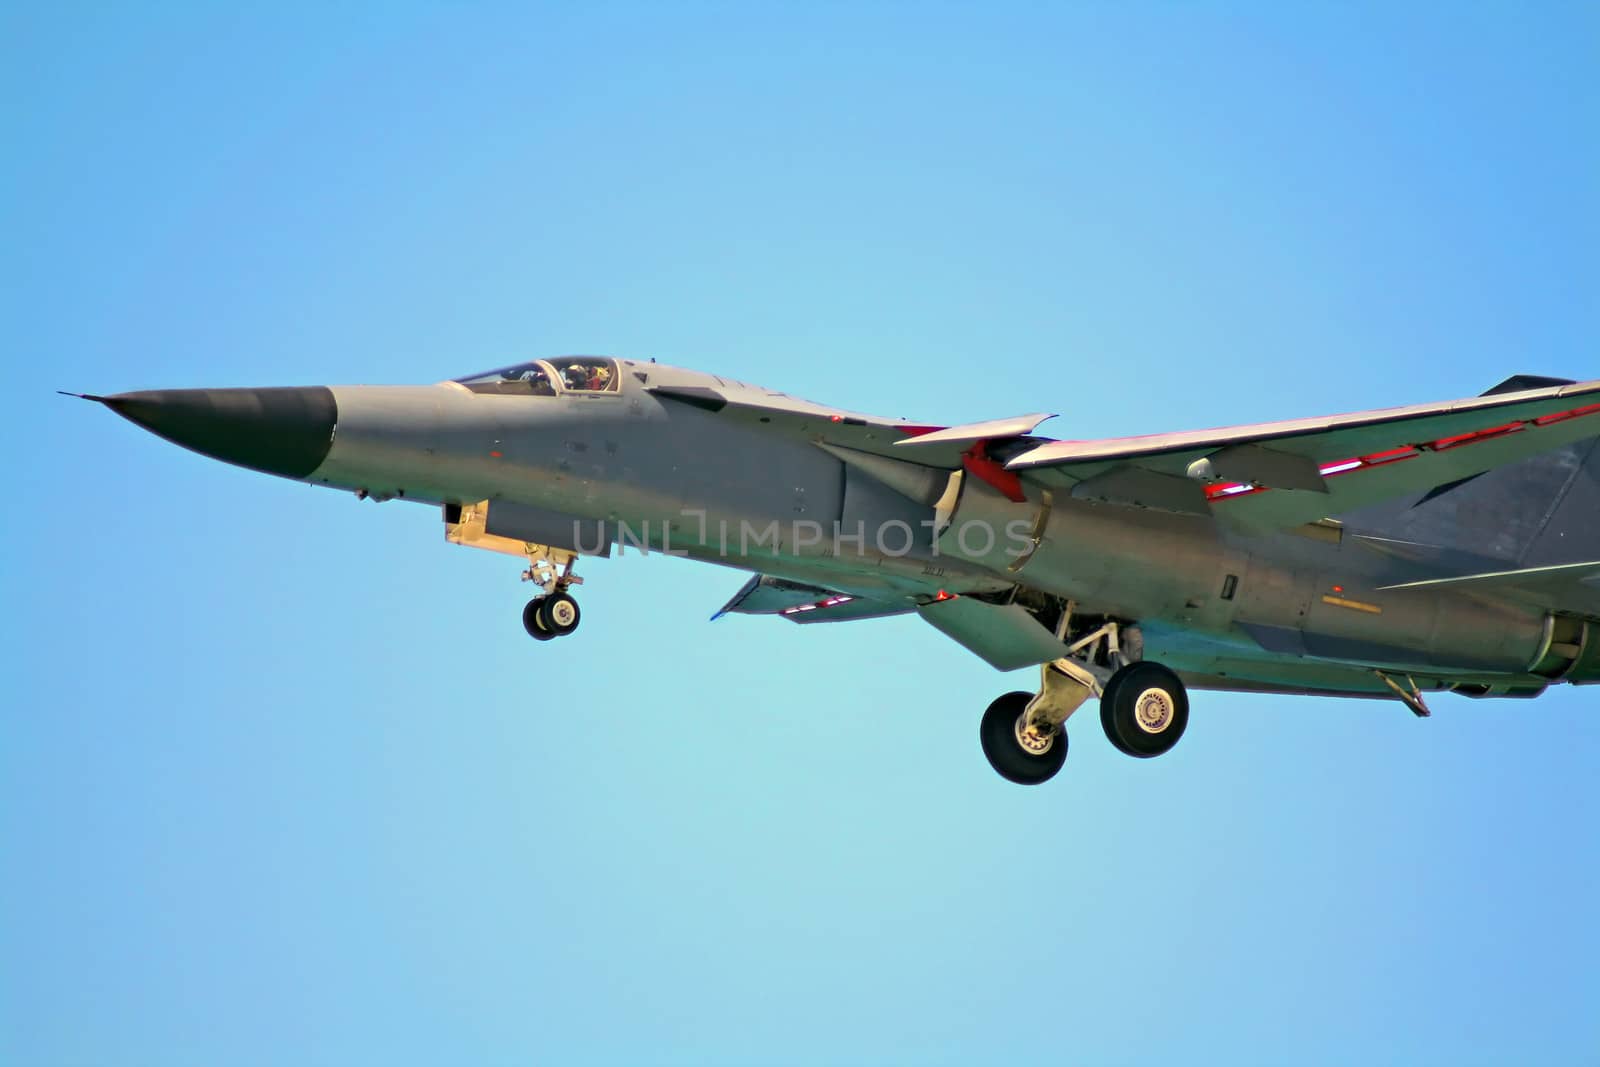 French made Dassault Mirage F 111 fighter bomber in flight.